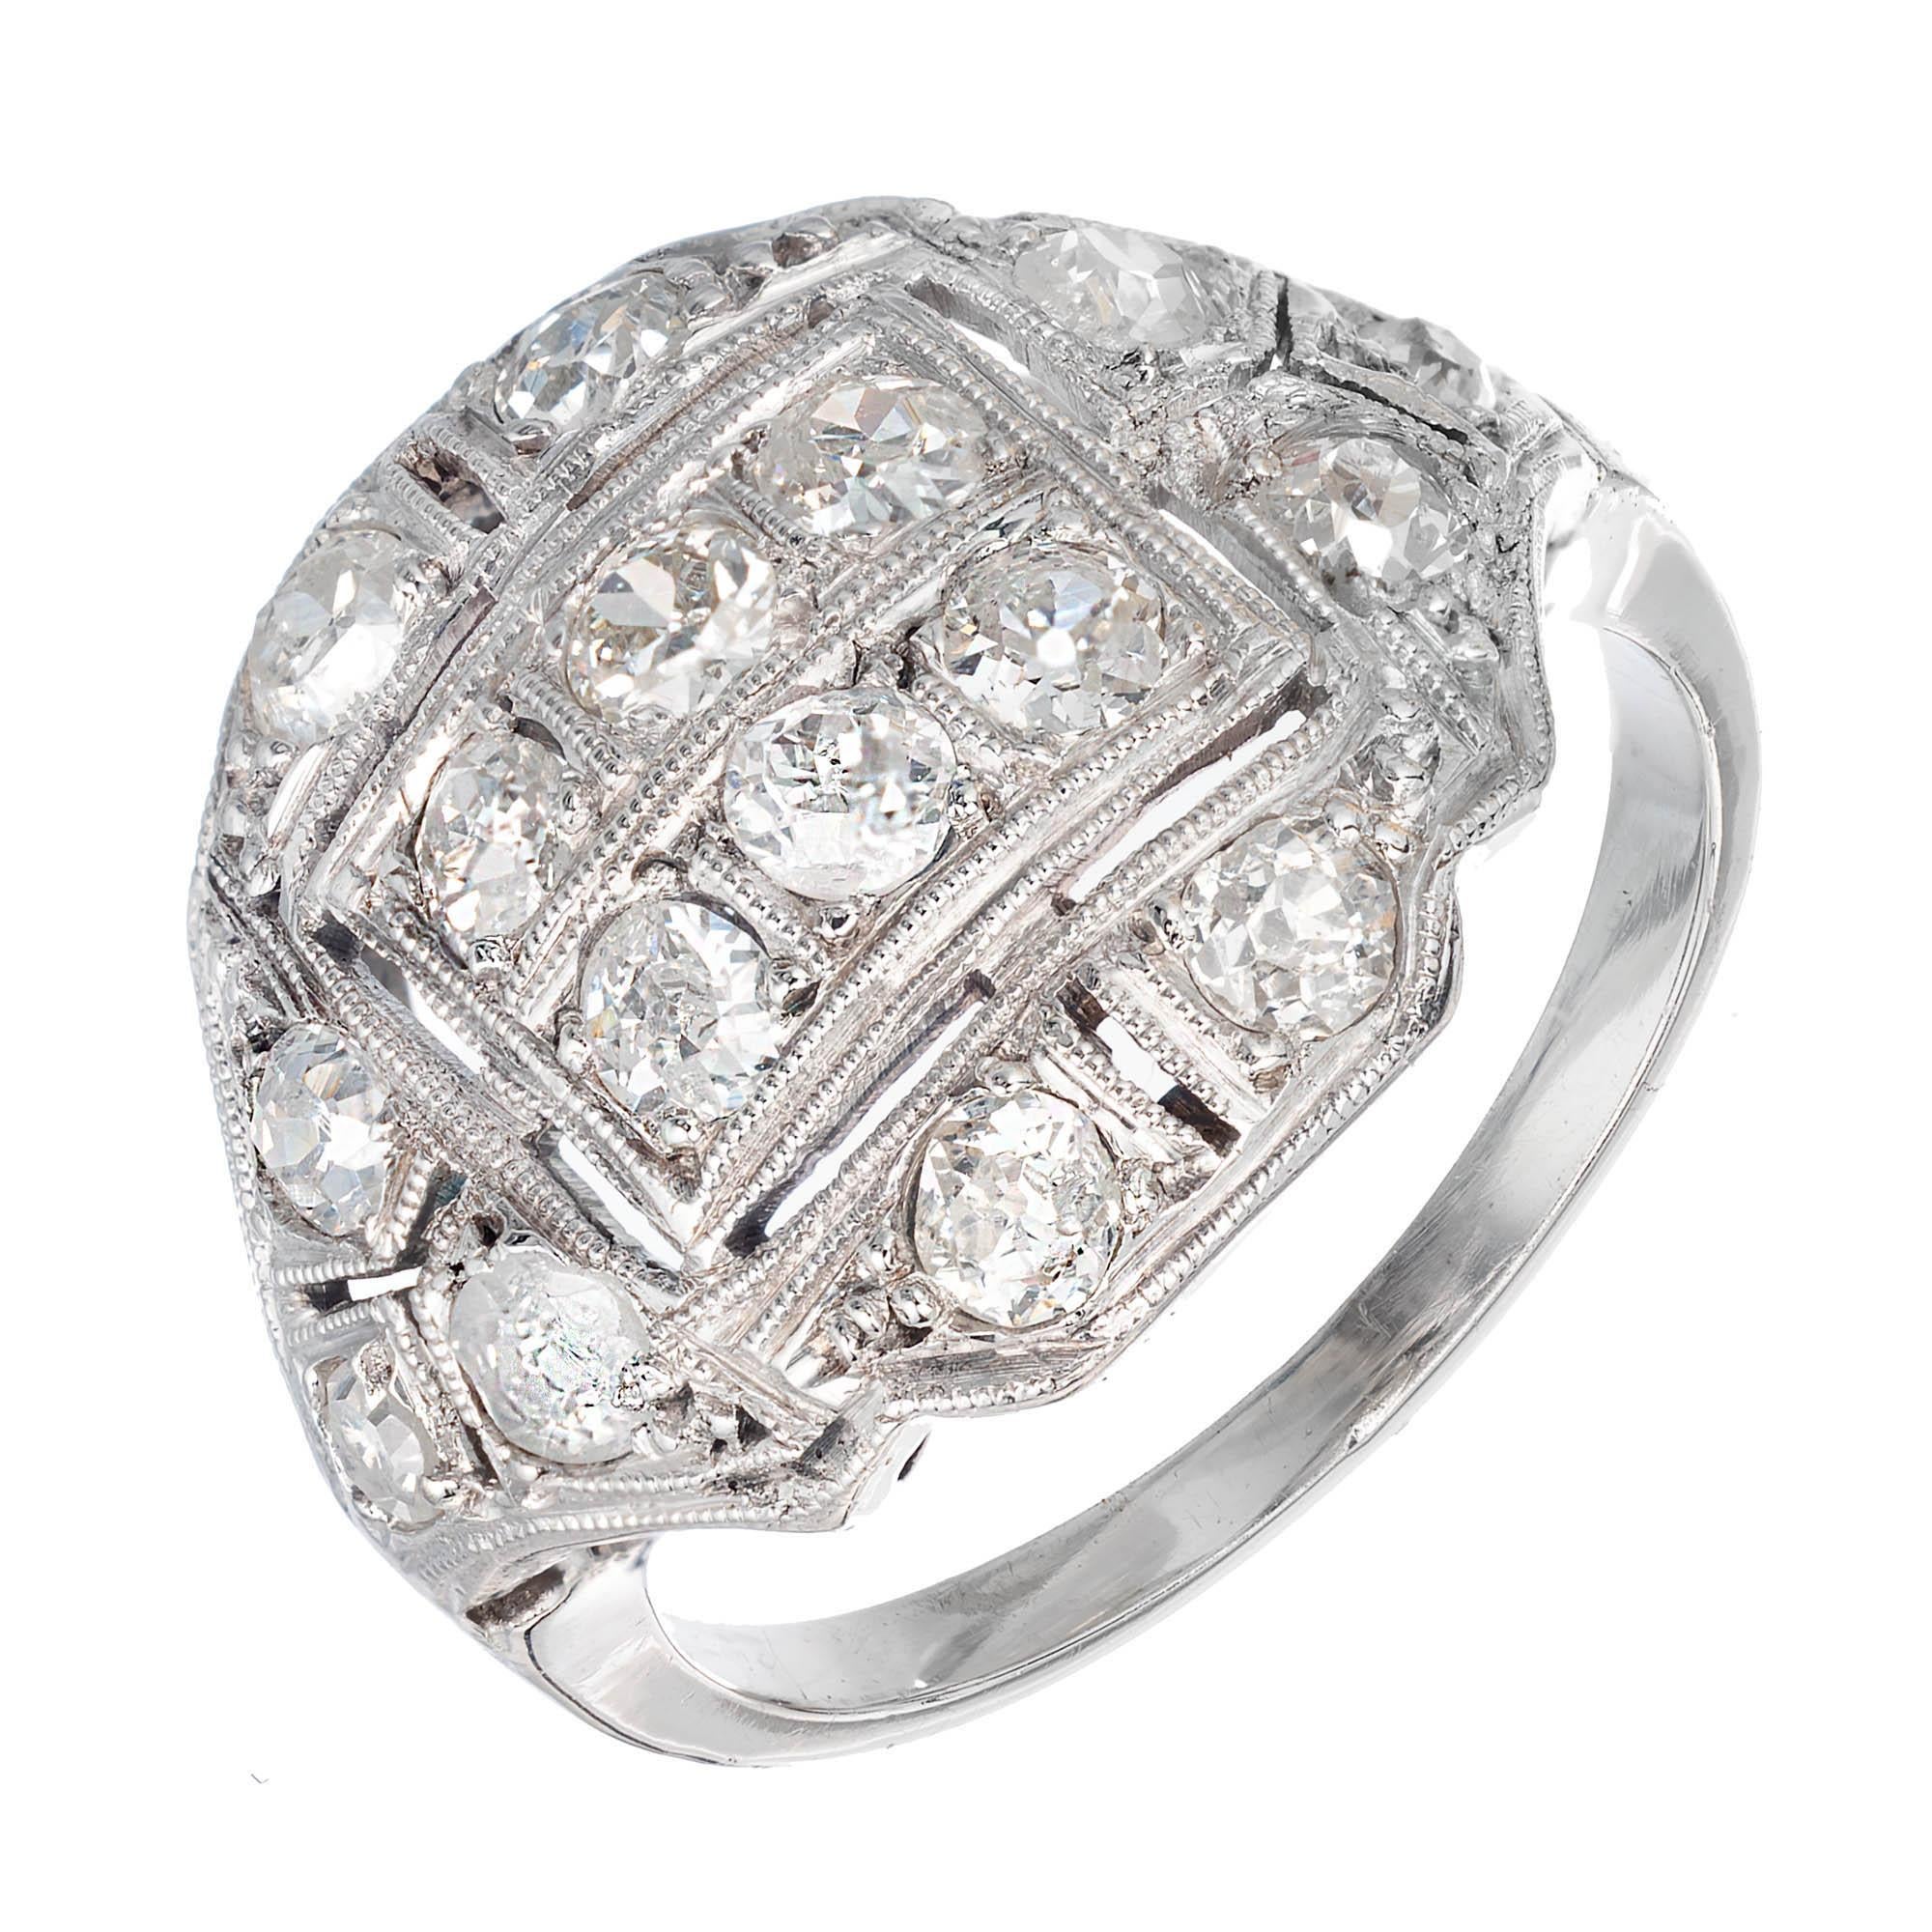 Victorian diamond ring- currant is pinkie size. Can be made larger. Simple low dome with a band set design. Circa 1890.

16 old mine H-I S1-I  diamonds, Approximate .90 carats 
Size 4.25 and sizable 
Platinum 
Tested: Platinum 
3.0 Grams
Width at